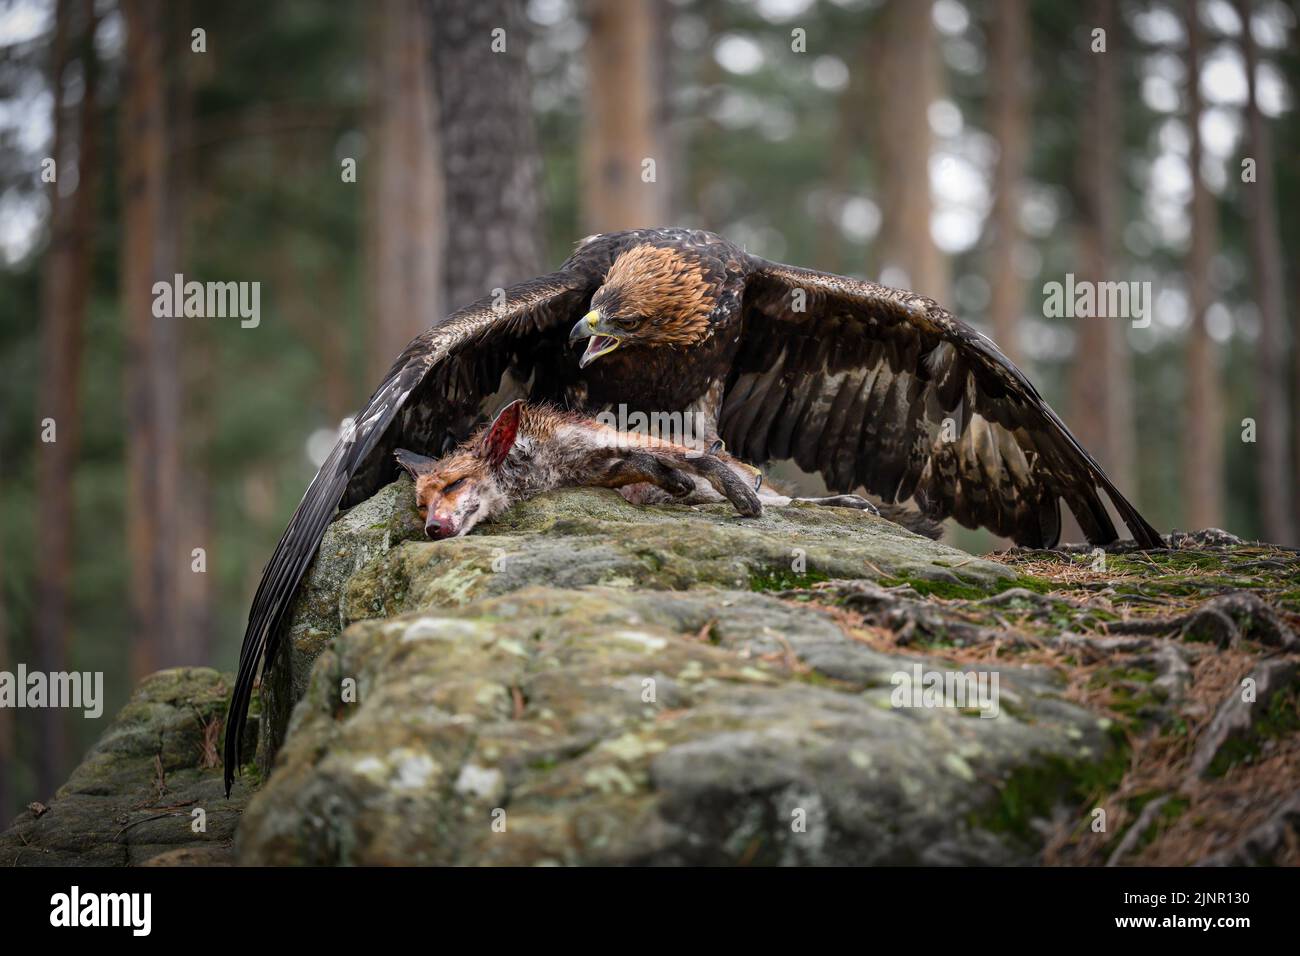 The bald eagle guards its prey. Stock Photo